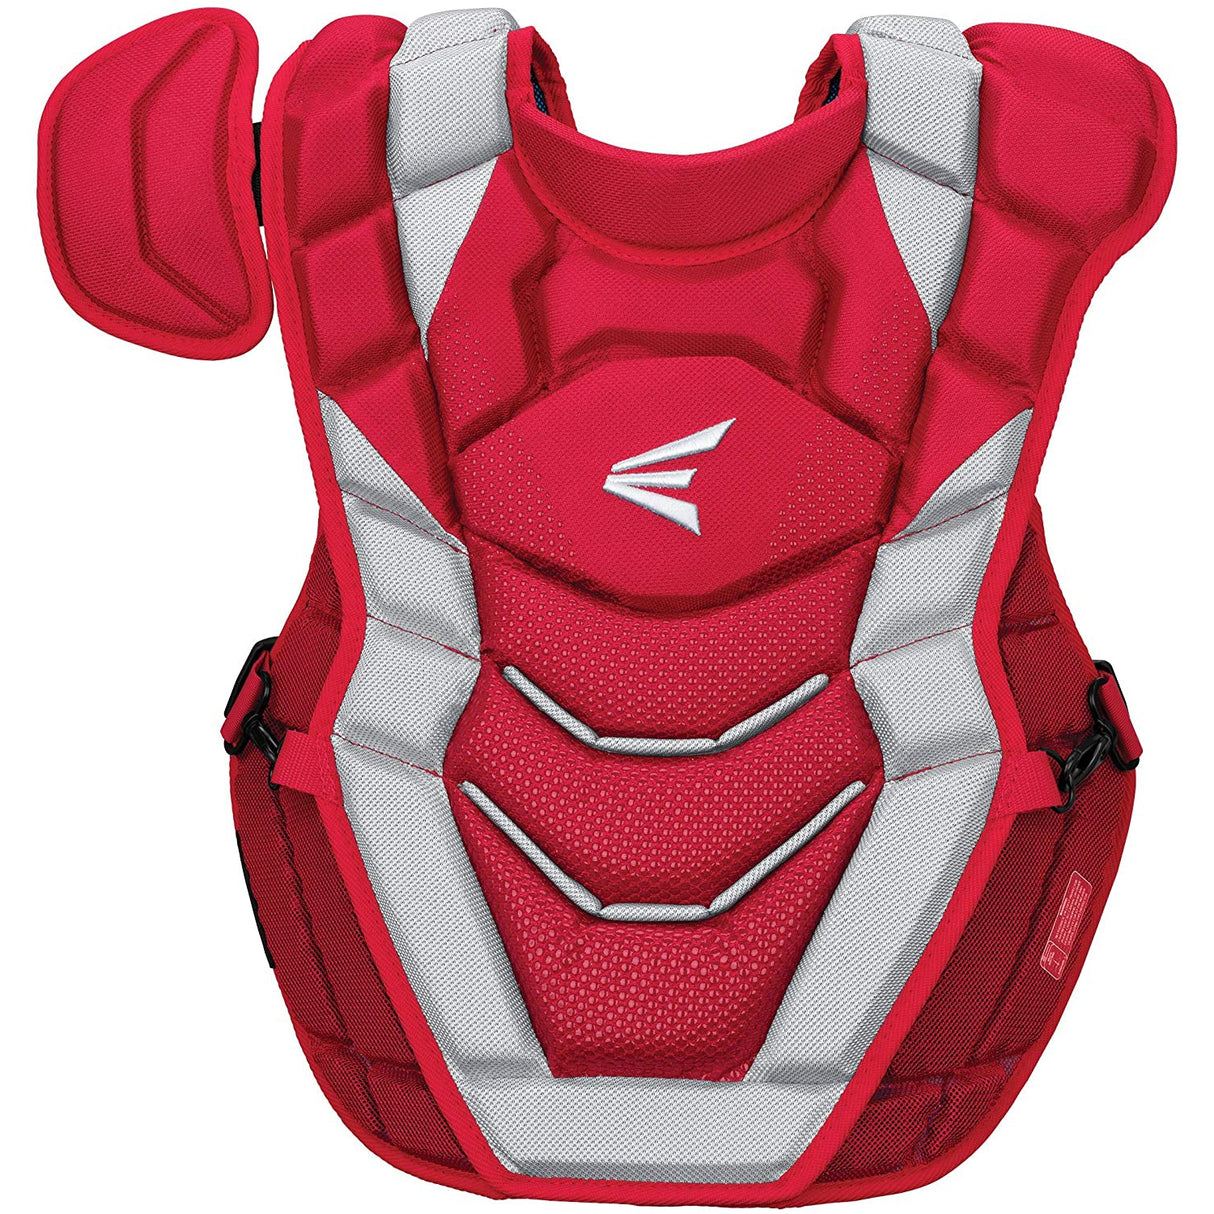 Easton Pro X Adult Baseball Catchers Chest Protector (Red/Silver) –  Guardian Baseball